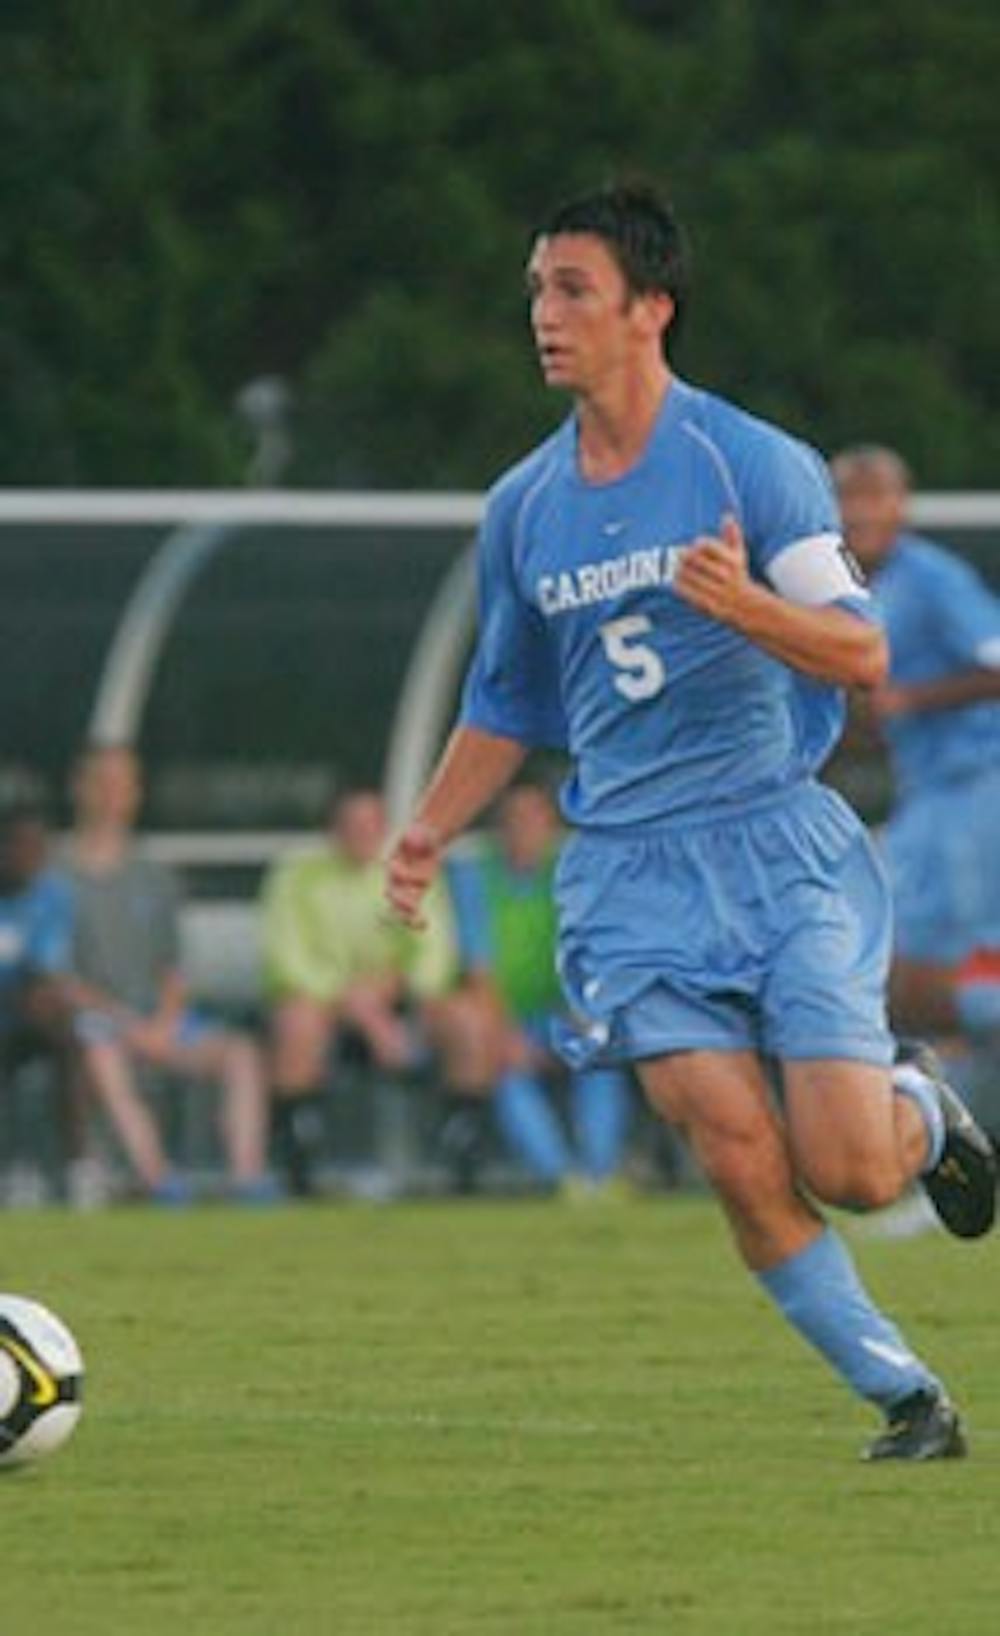 The men’s soccer team's 2008 run to the national title game and earned a preseason No. 2 national ranking.